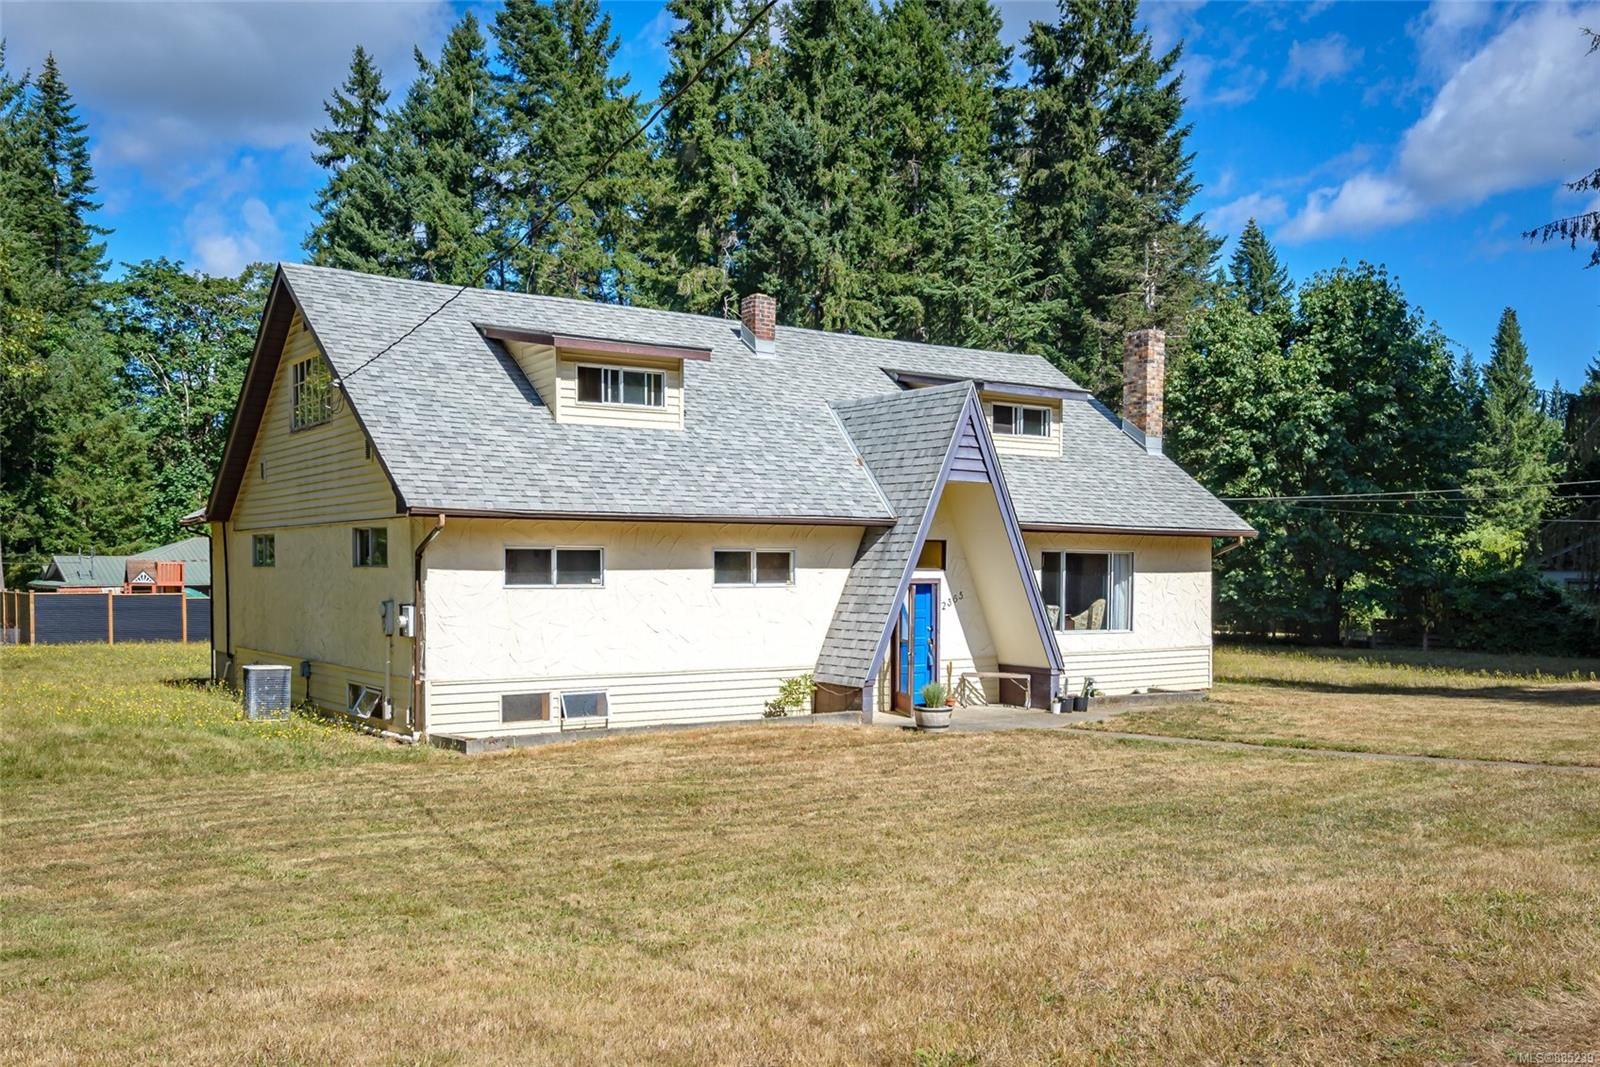 Photo 2: Photos: 2365 Lake Trail Rd in Courtenay: CV Courtenay West House for sale (Comox Valley)  : MLS®# 885239